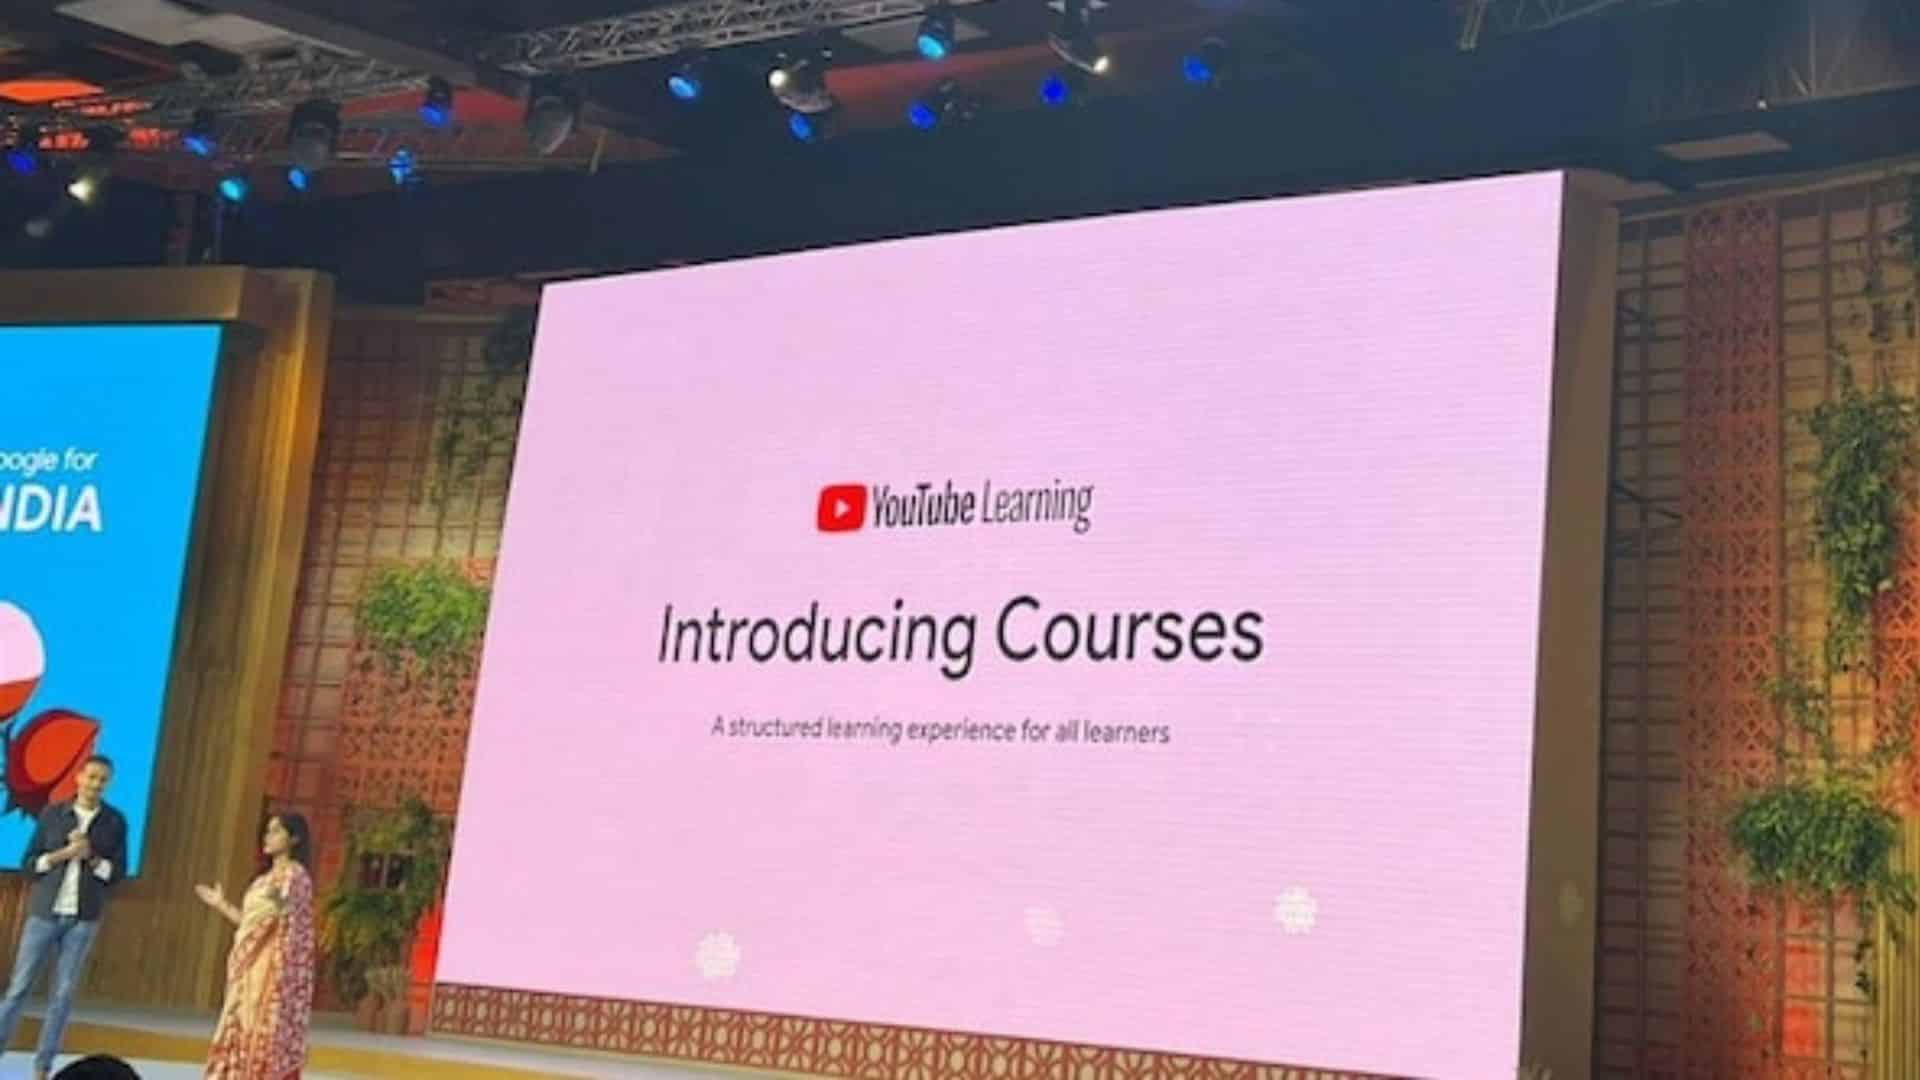 YouTube Launches Courses In India, Auto-Dubbing For Healthcare Videos